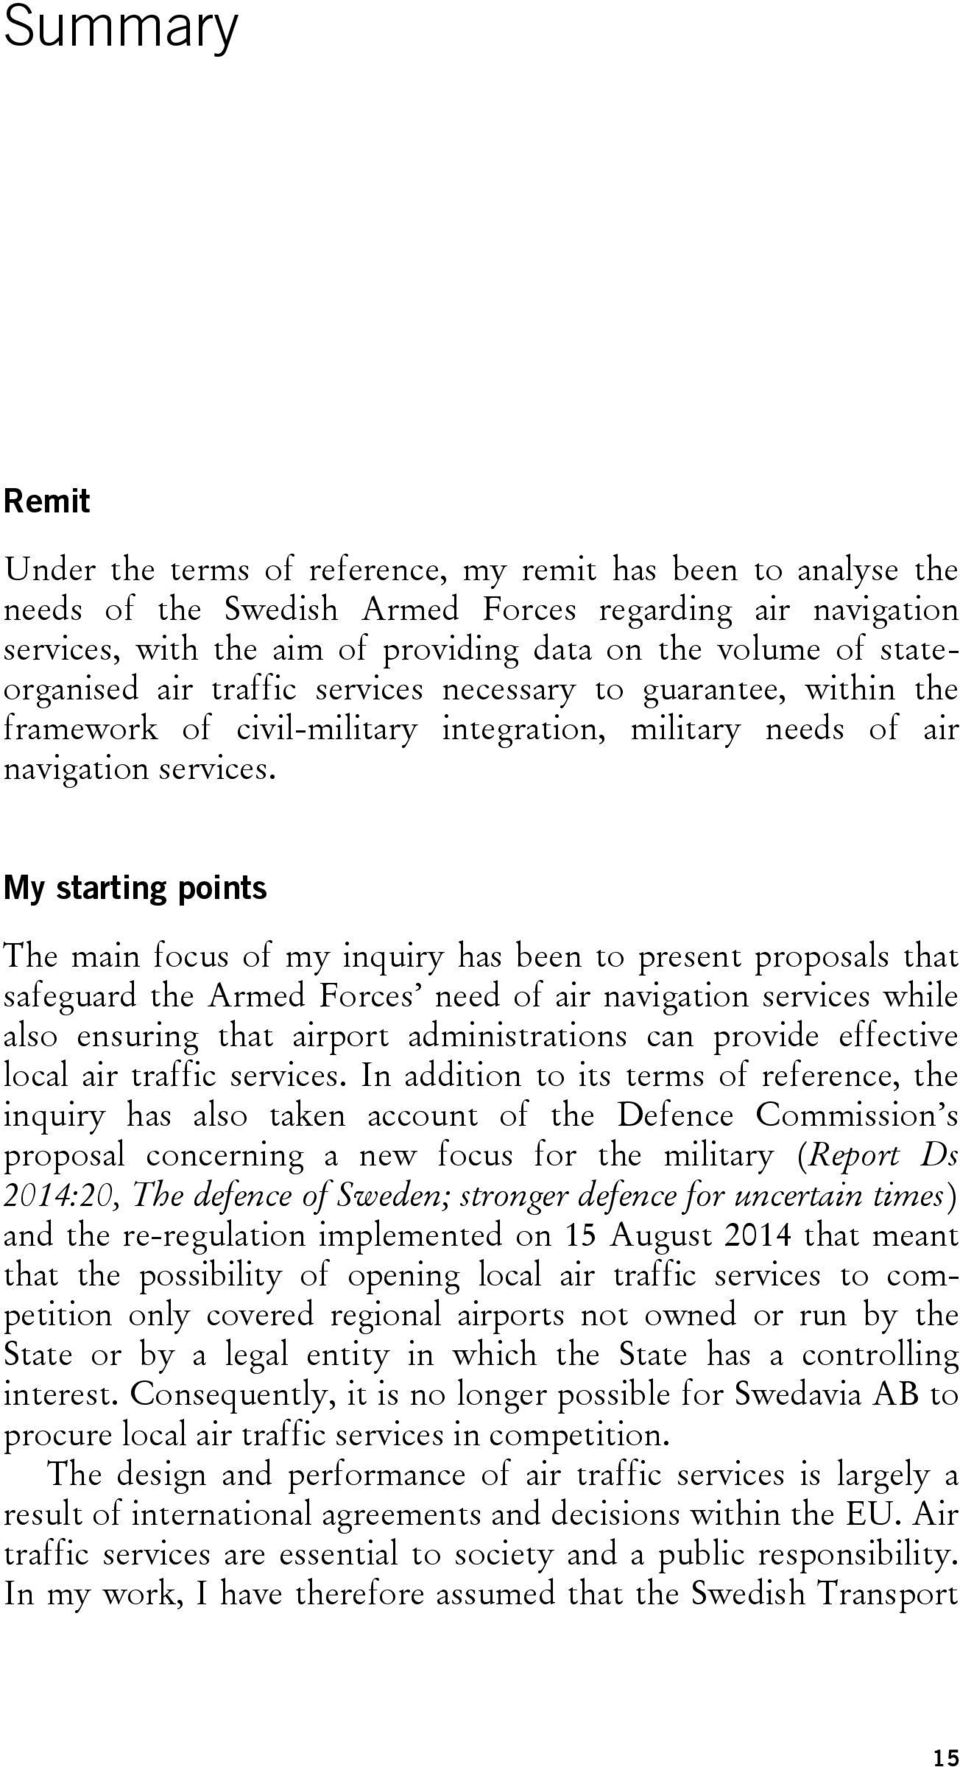 My starting points The main focus of my inquiry has been to present proposals that safeguard the Armed Forces need of air navigation services while also ensuring that airport administrations can